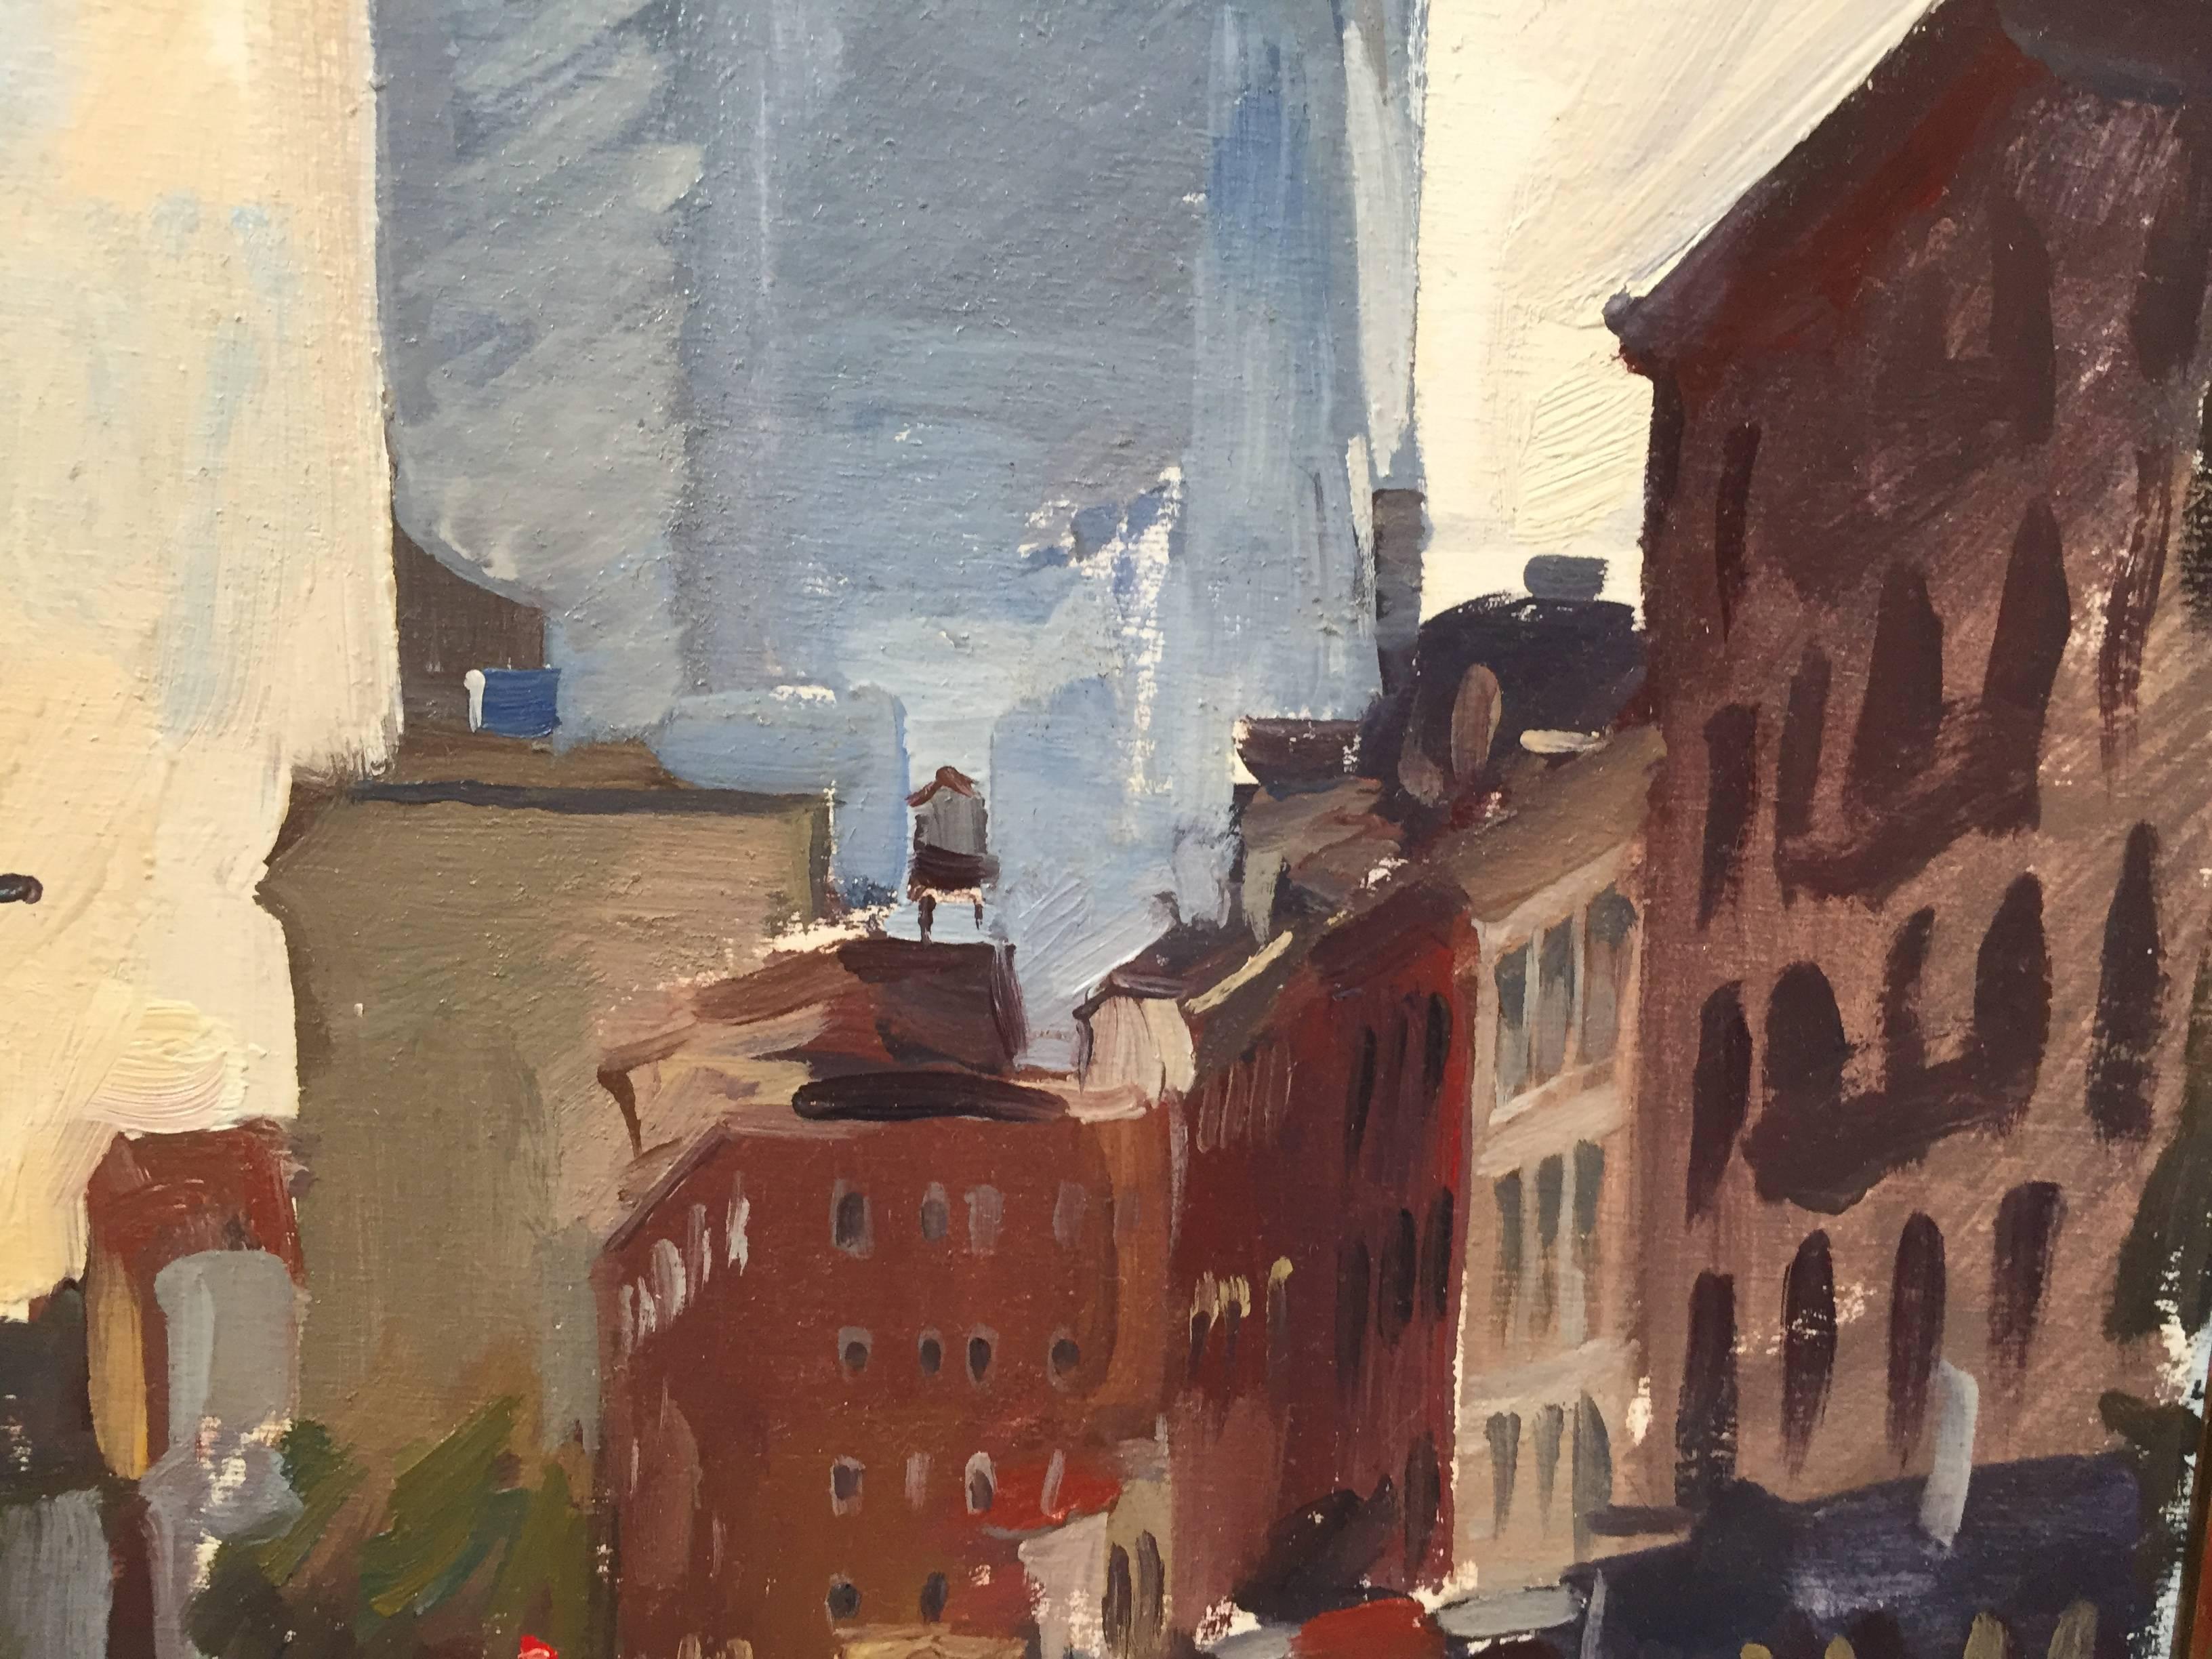 Painted en plein air in the streets of New York City, Dalessio makes the tall Freedom Tower this painting's subject. A silvery blue icon that stretches to the sky, towers over the smaller 4-story buildings in the foreground on West Broadway. Down